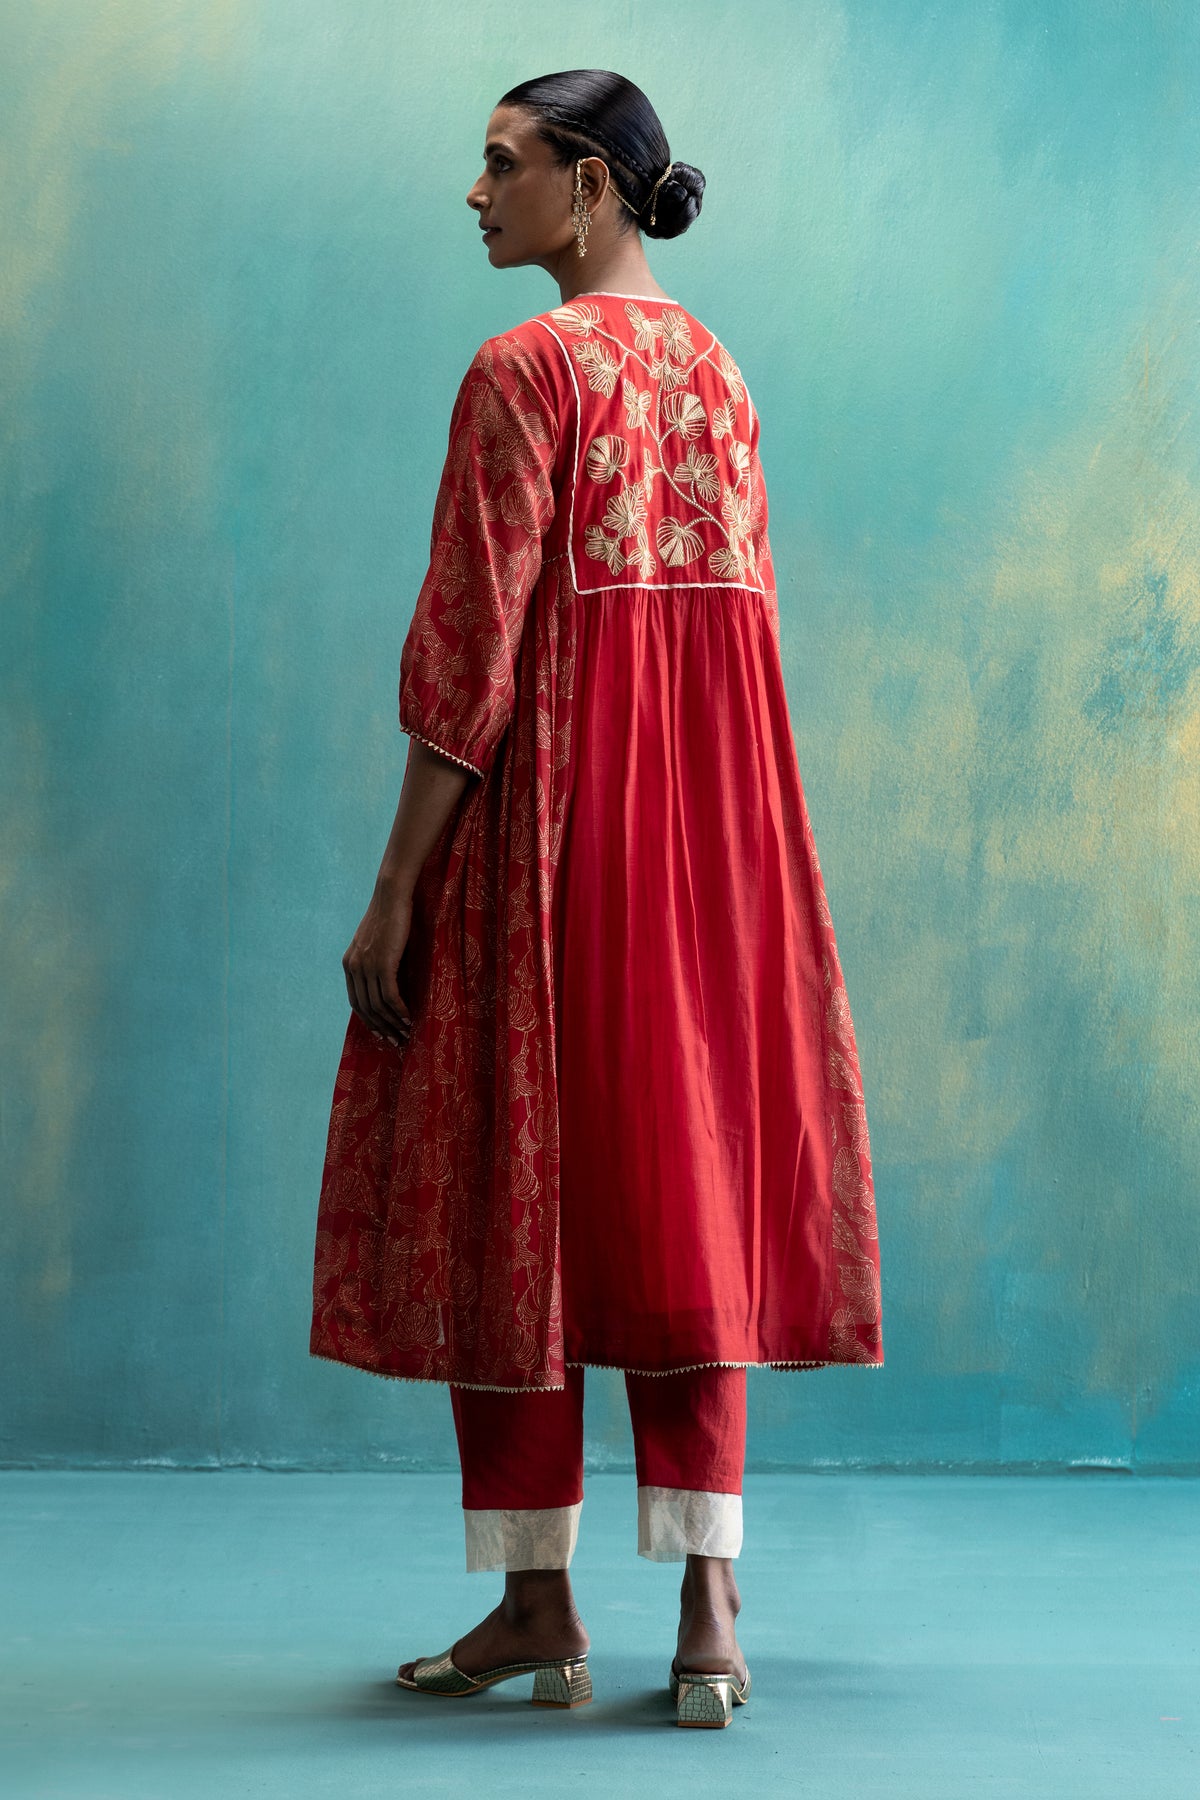 DIL-KASH RED CHANDERI FRONT AND BACK FLORAL EMBROIDERY WITH SIDE PLEATS AND GOLD BLOCK PRINT KURTA SET OF 3